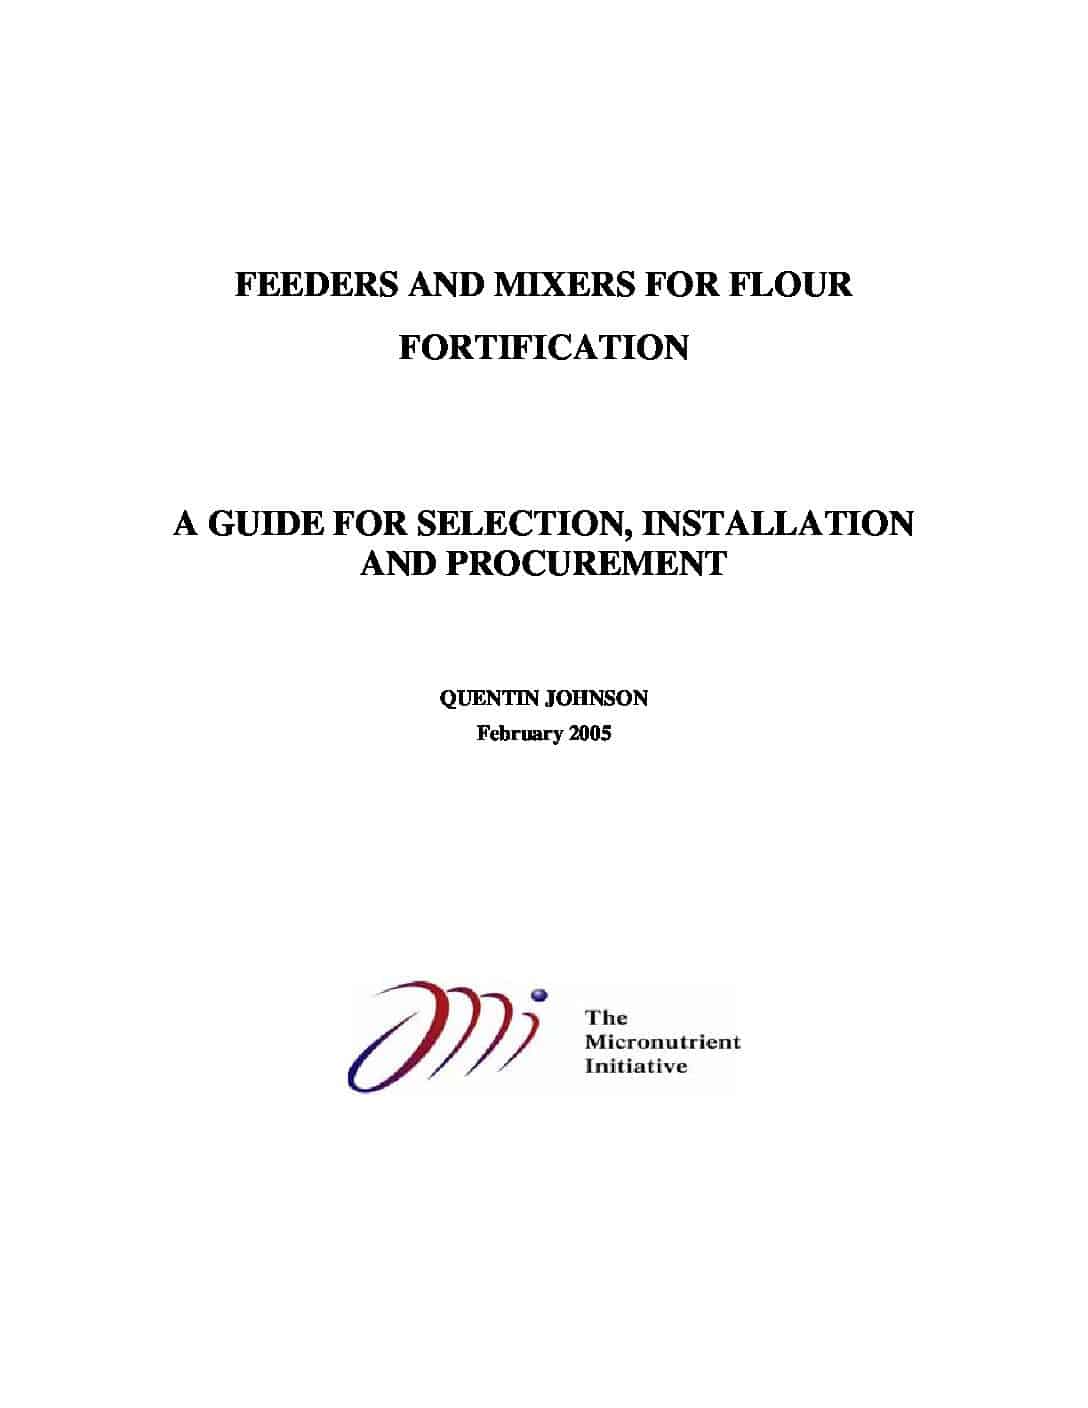 Feeders and Mixers for Flour fortification: A Guide for Selection, Installment and Procurement thumbnail